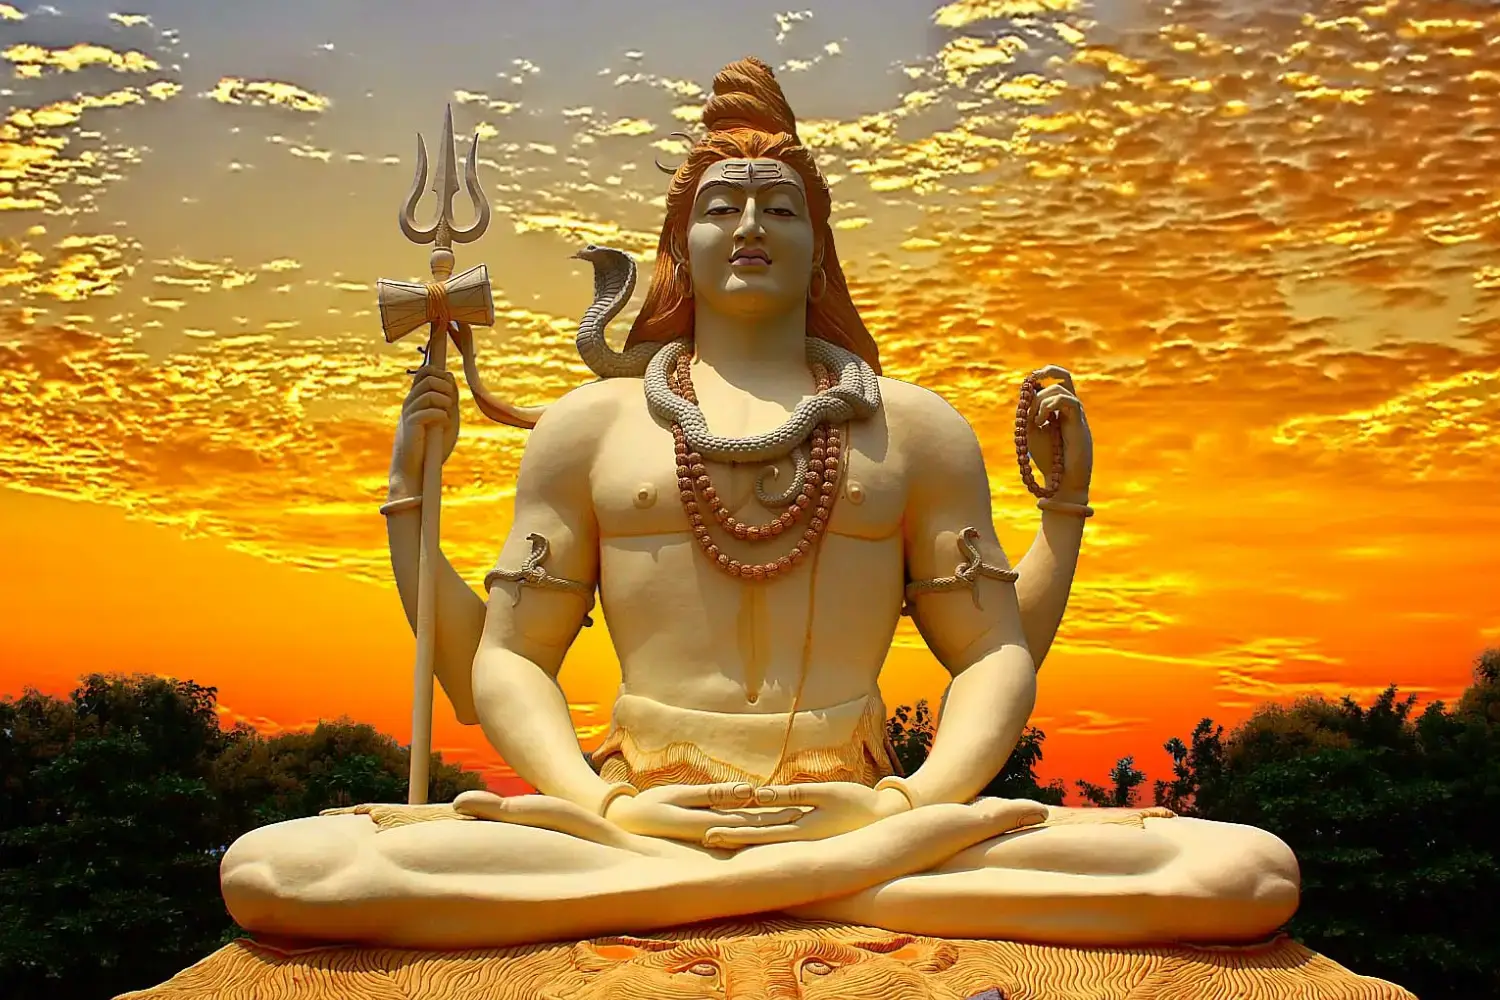 12 Jyotirlingas Temples of Lord Shiva in India